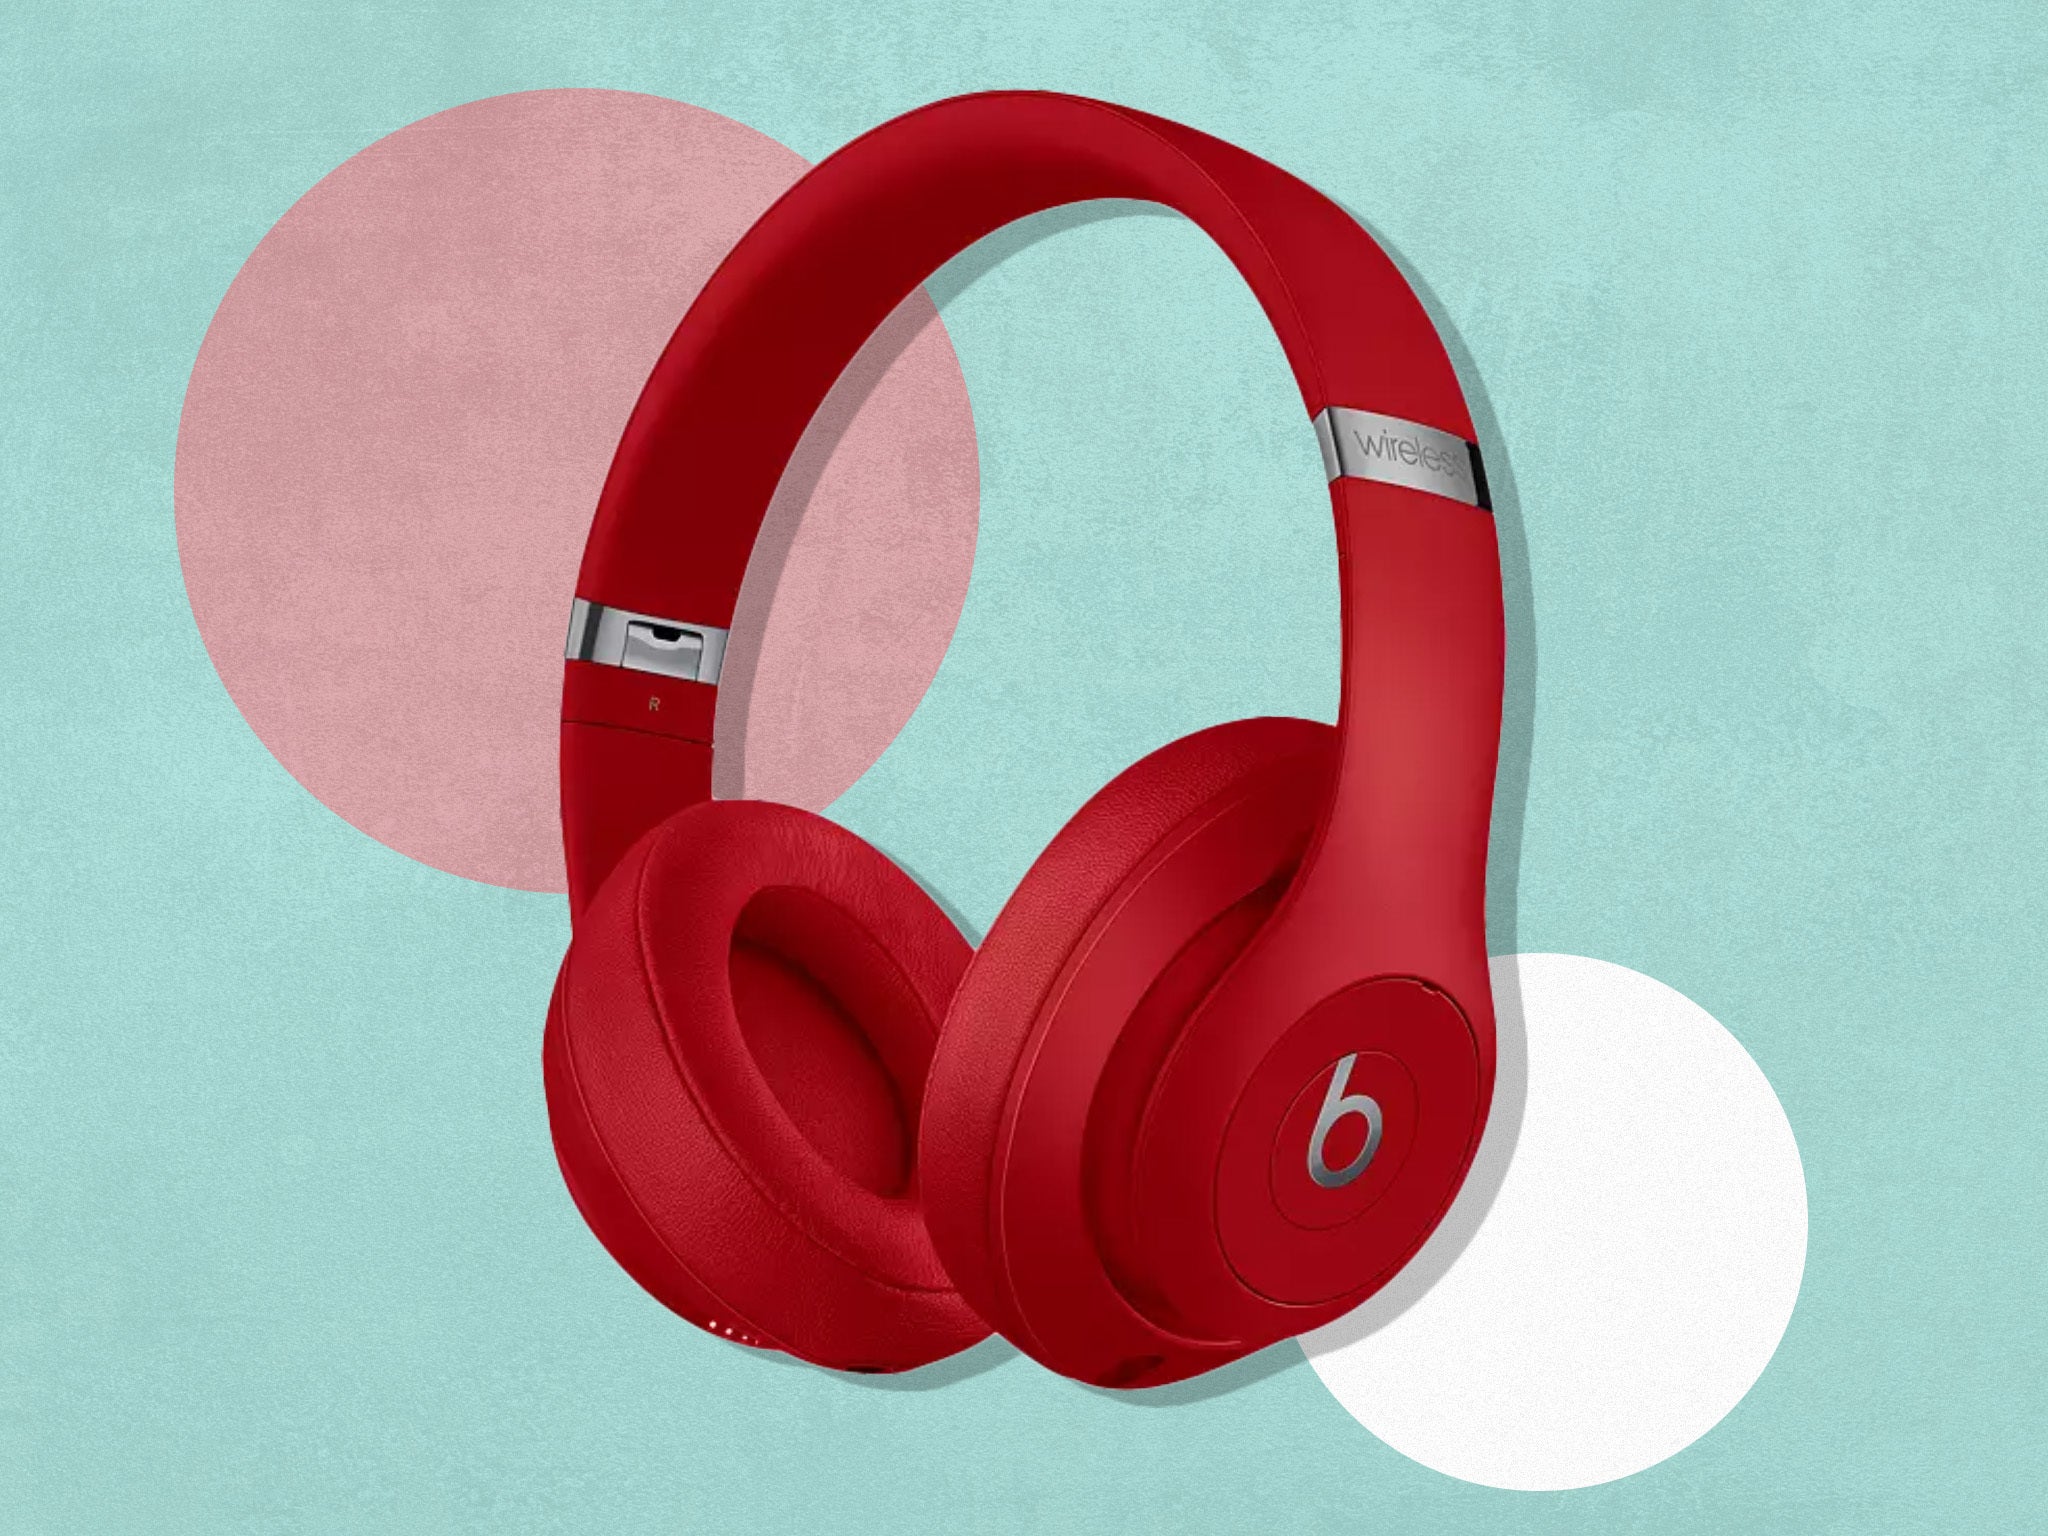 After five years, is Beats’s premium headset beginning to show its age?